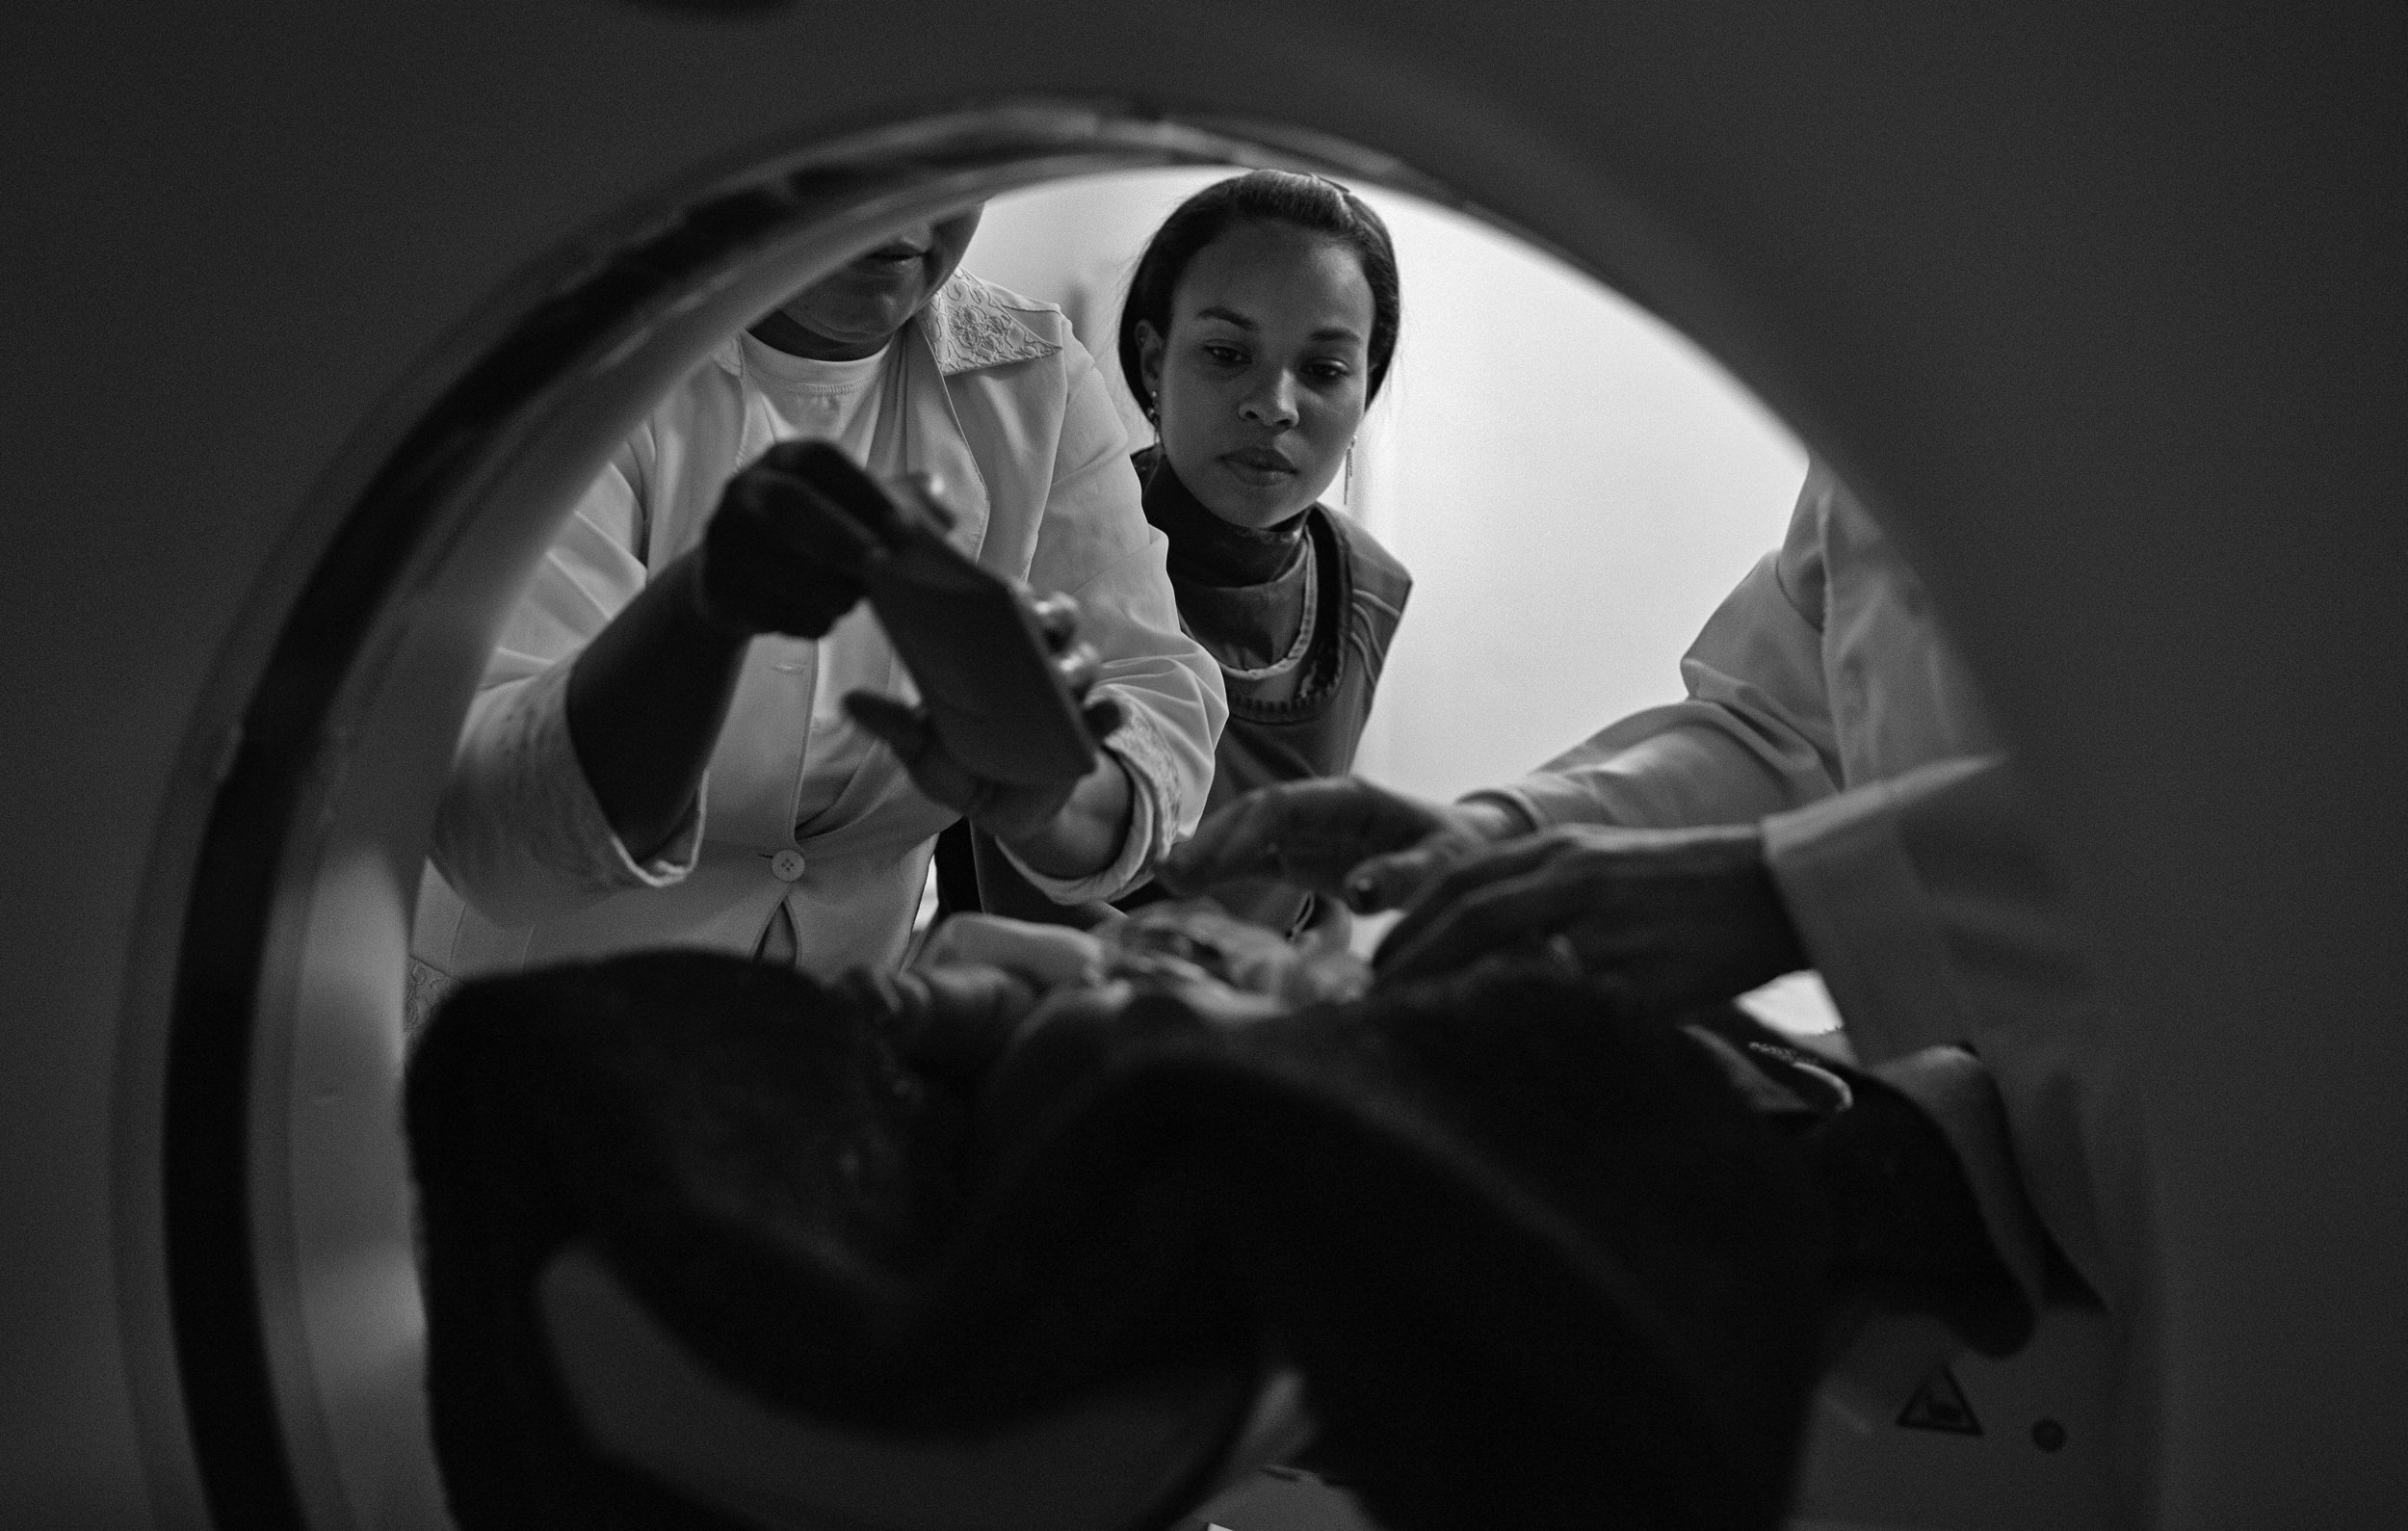  Amanda Santos, age 19, watches her baby, Emanuel, 3 months, as a nurse and radiologist technician try to calm and prepare her crying son in order to take a CT scan of his head. Emanuel was born with microcephaly, and Amanda believes she had Zika ear